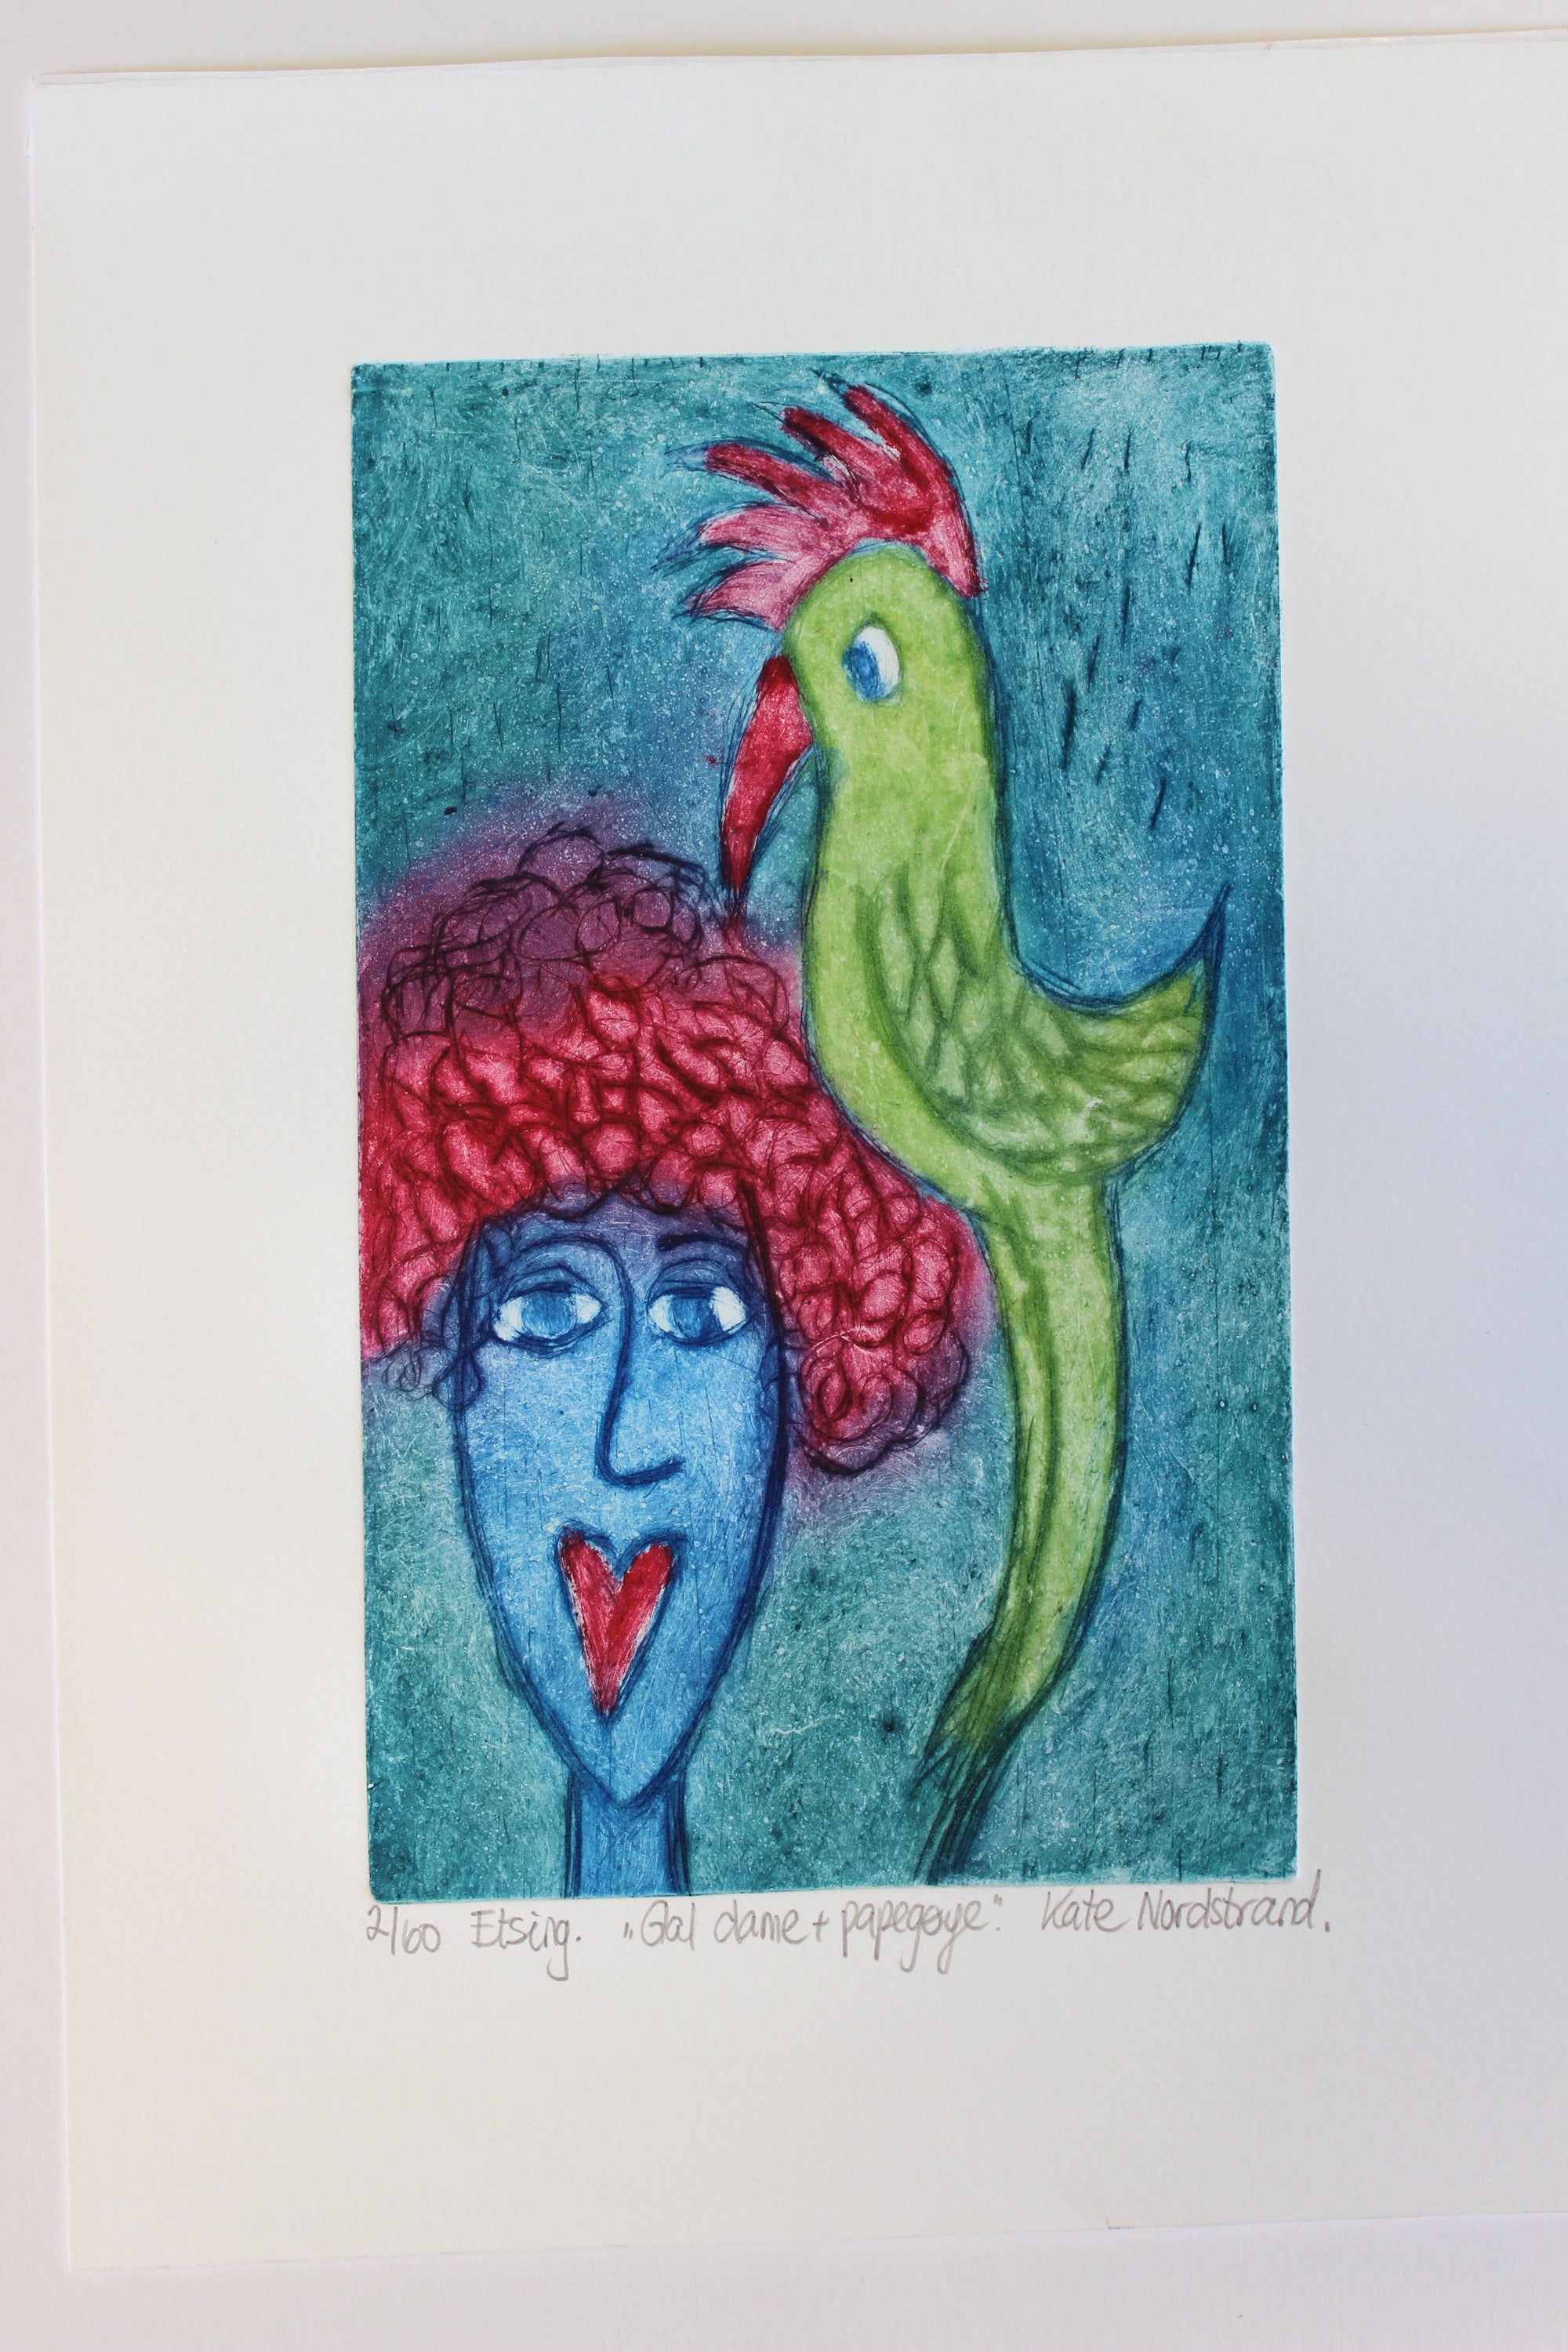 Etching "Crazy Lady + Parrot" 2